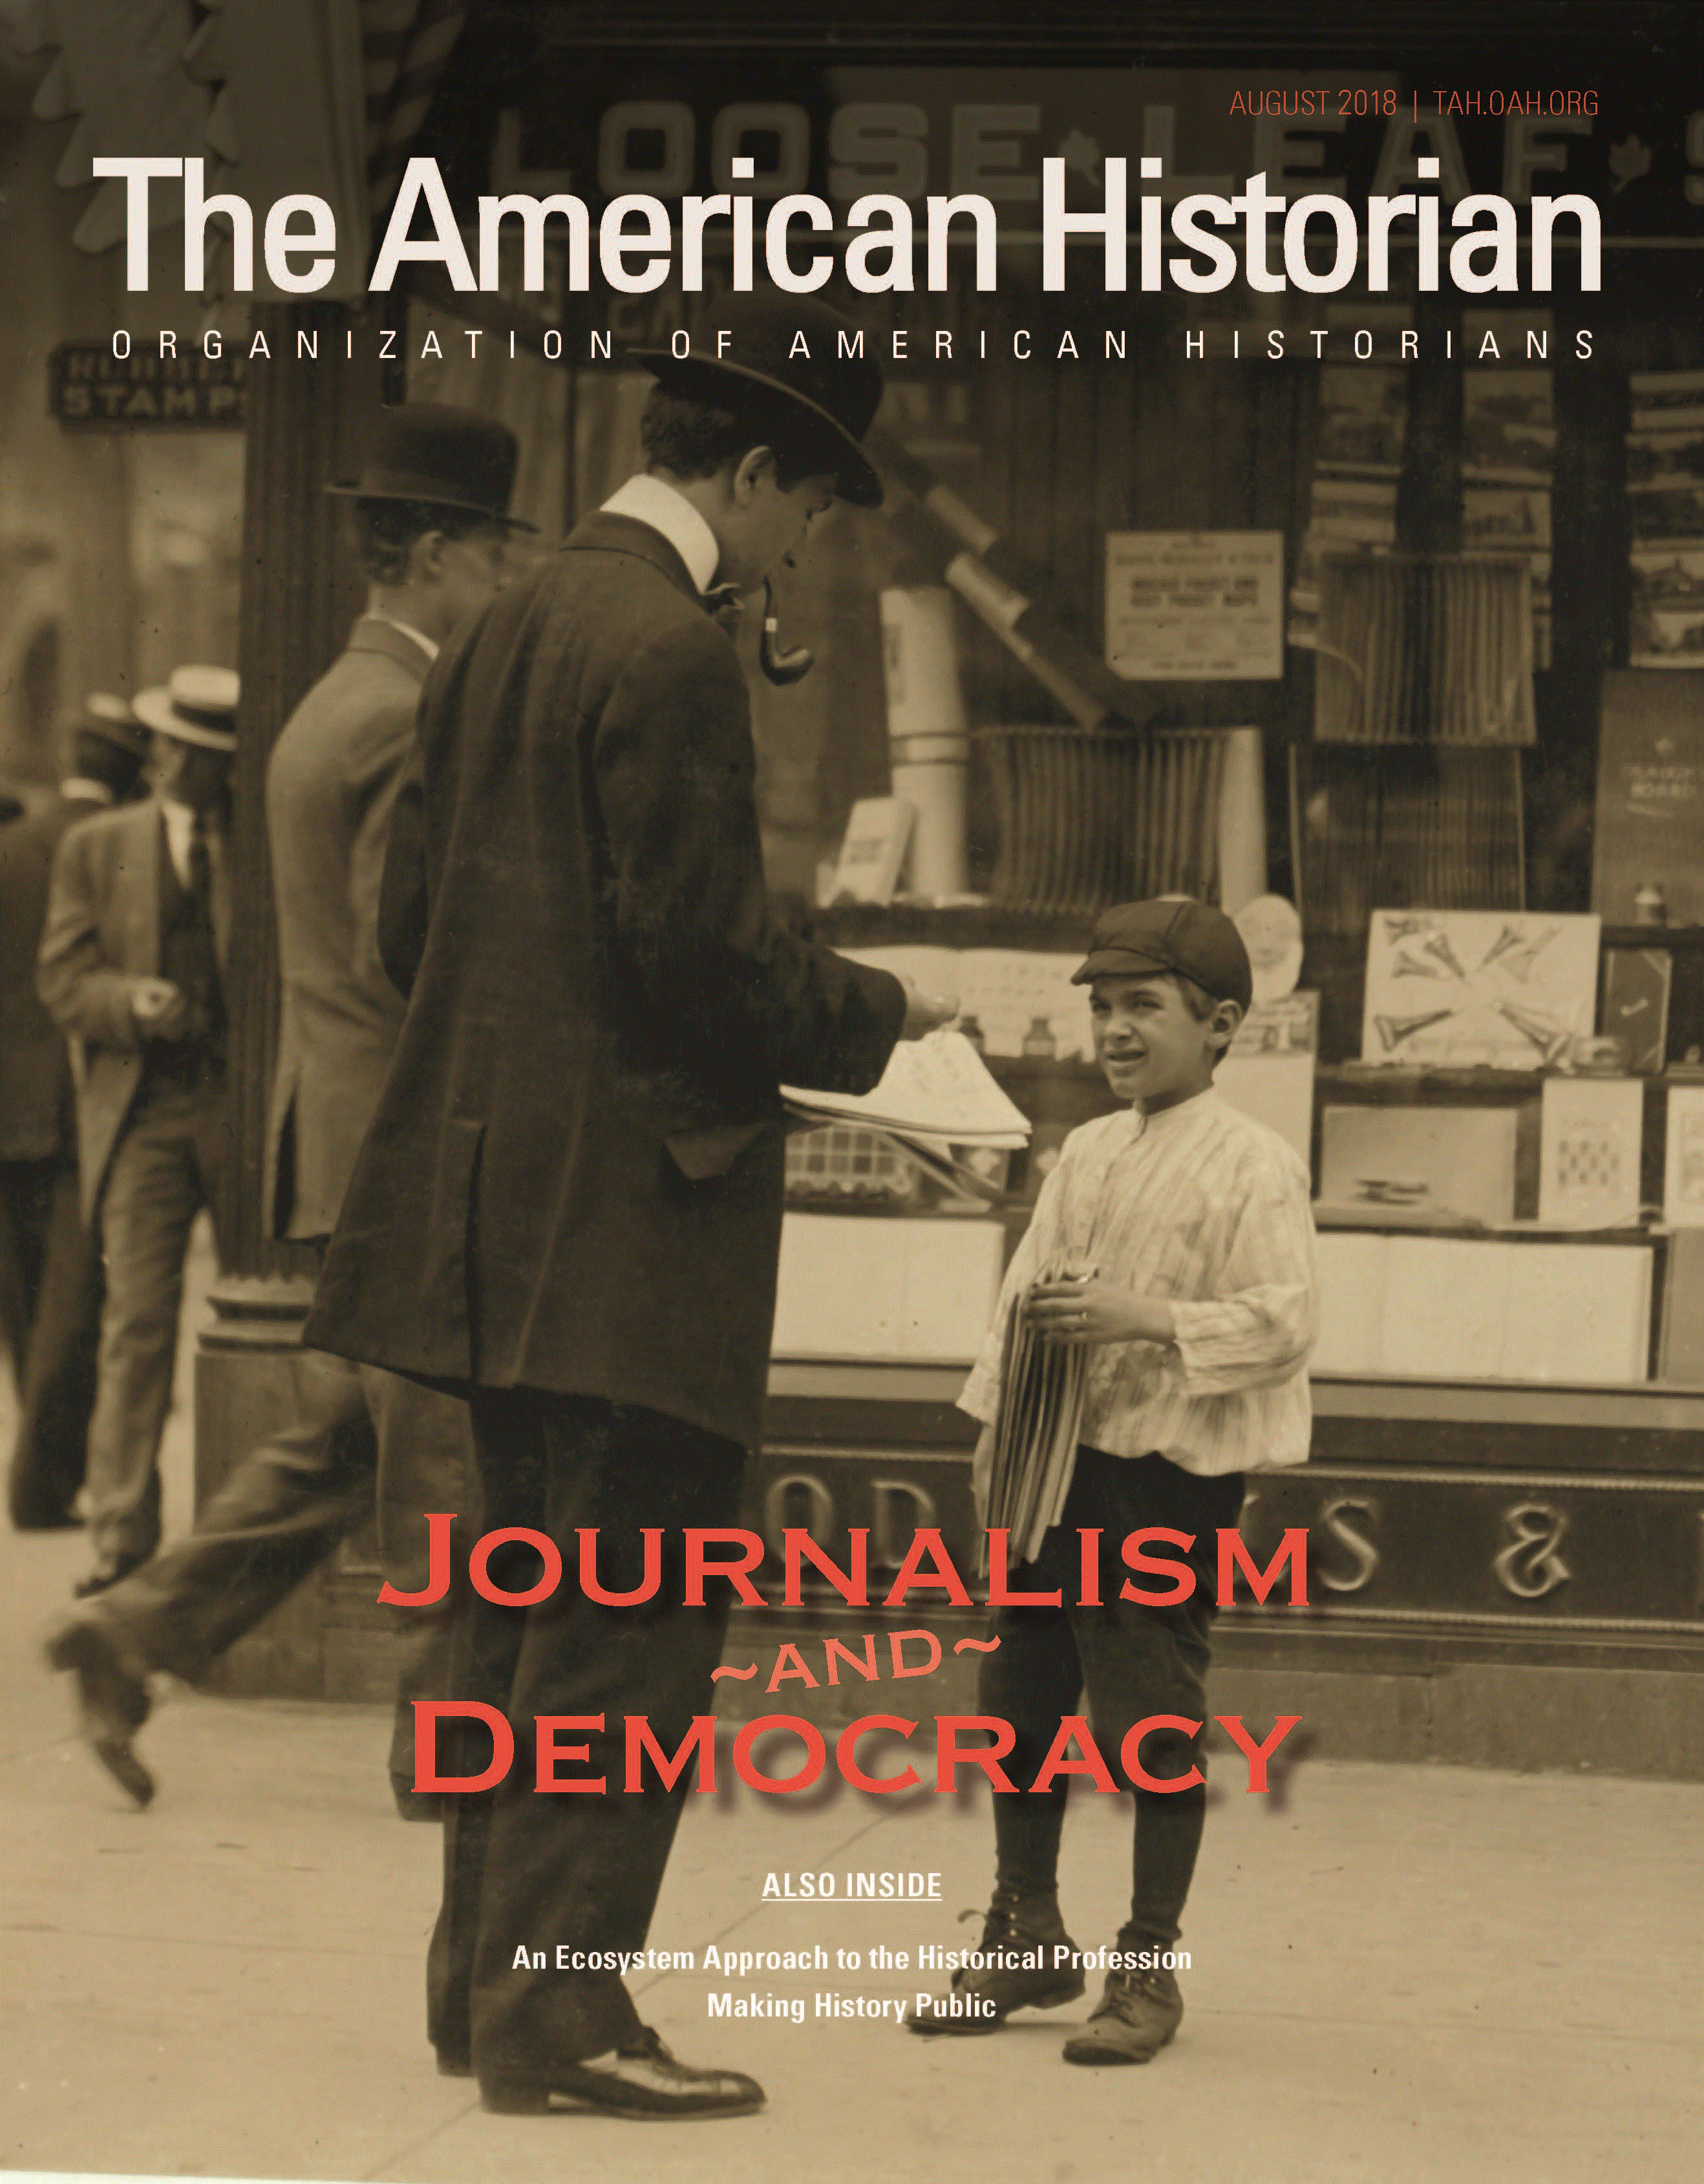 This issue's cover is a brown and white photograph of a man with a pipe, pad, and pen, interviewing a child on the street, with the issue title 